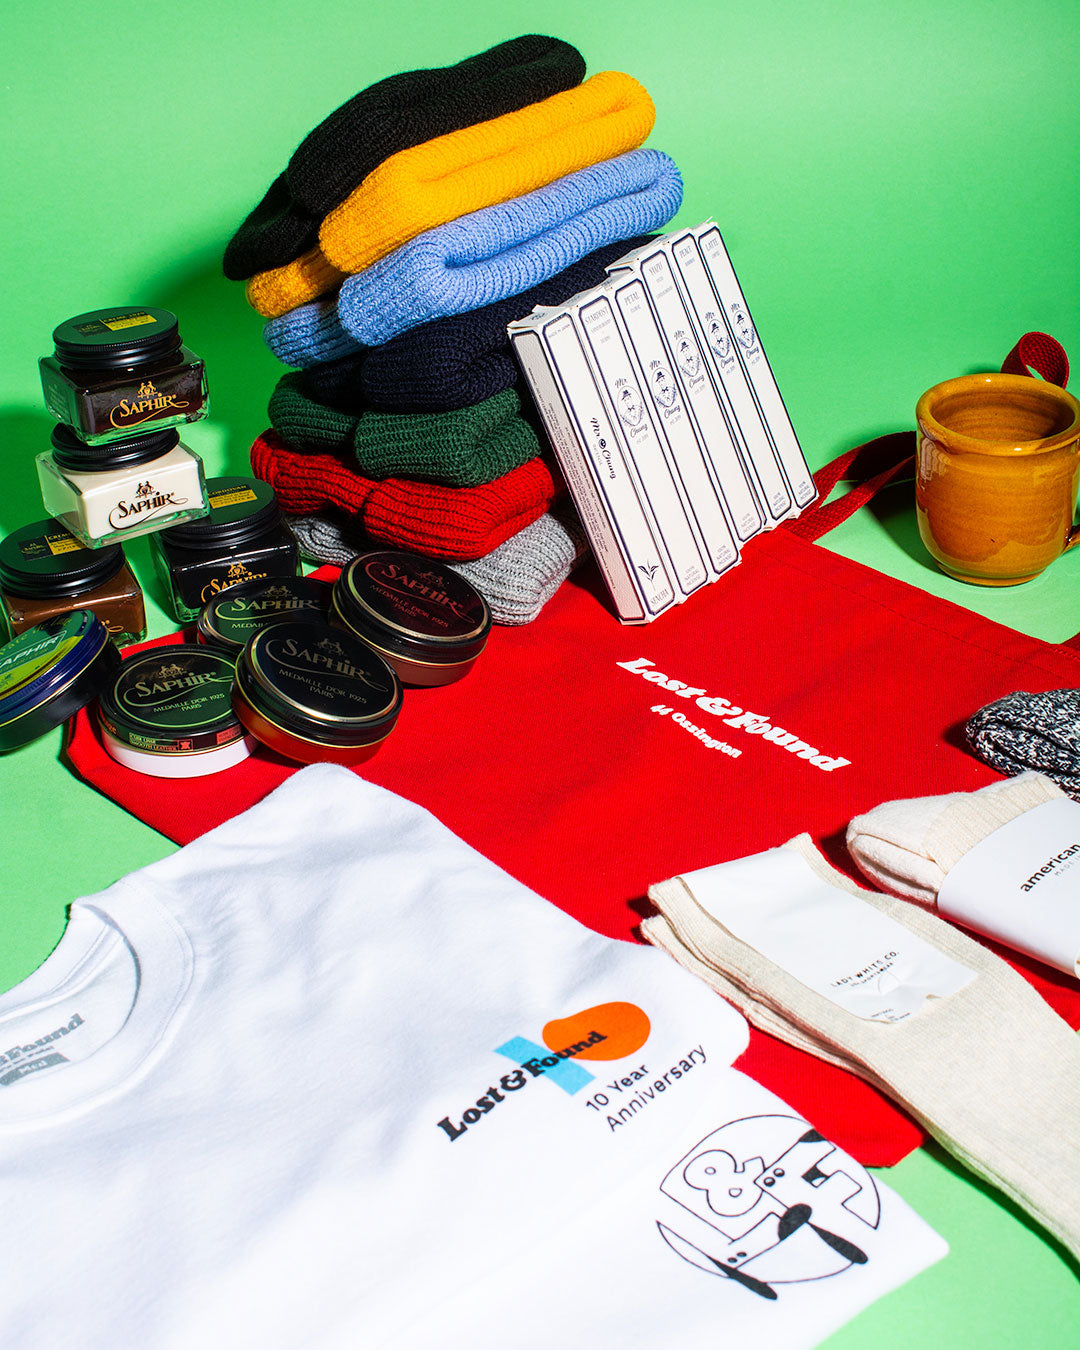 Lost & Found Gift Guide. Featuring brands such as Paraboot, The Real McCoy's, Carhartt WIP, Mr. Chung, Tender, Nanga, Howlin', Adsum and many more!